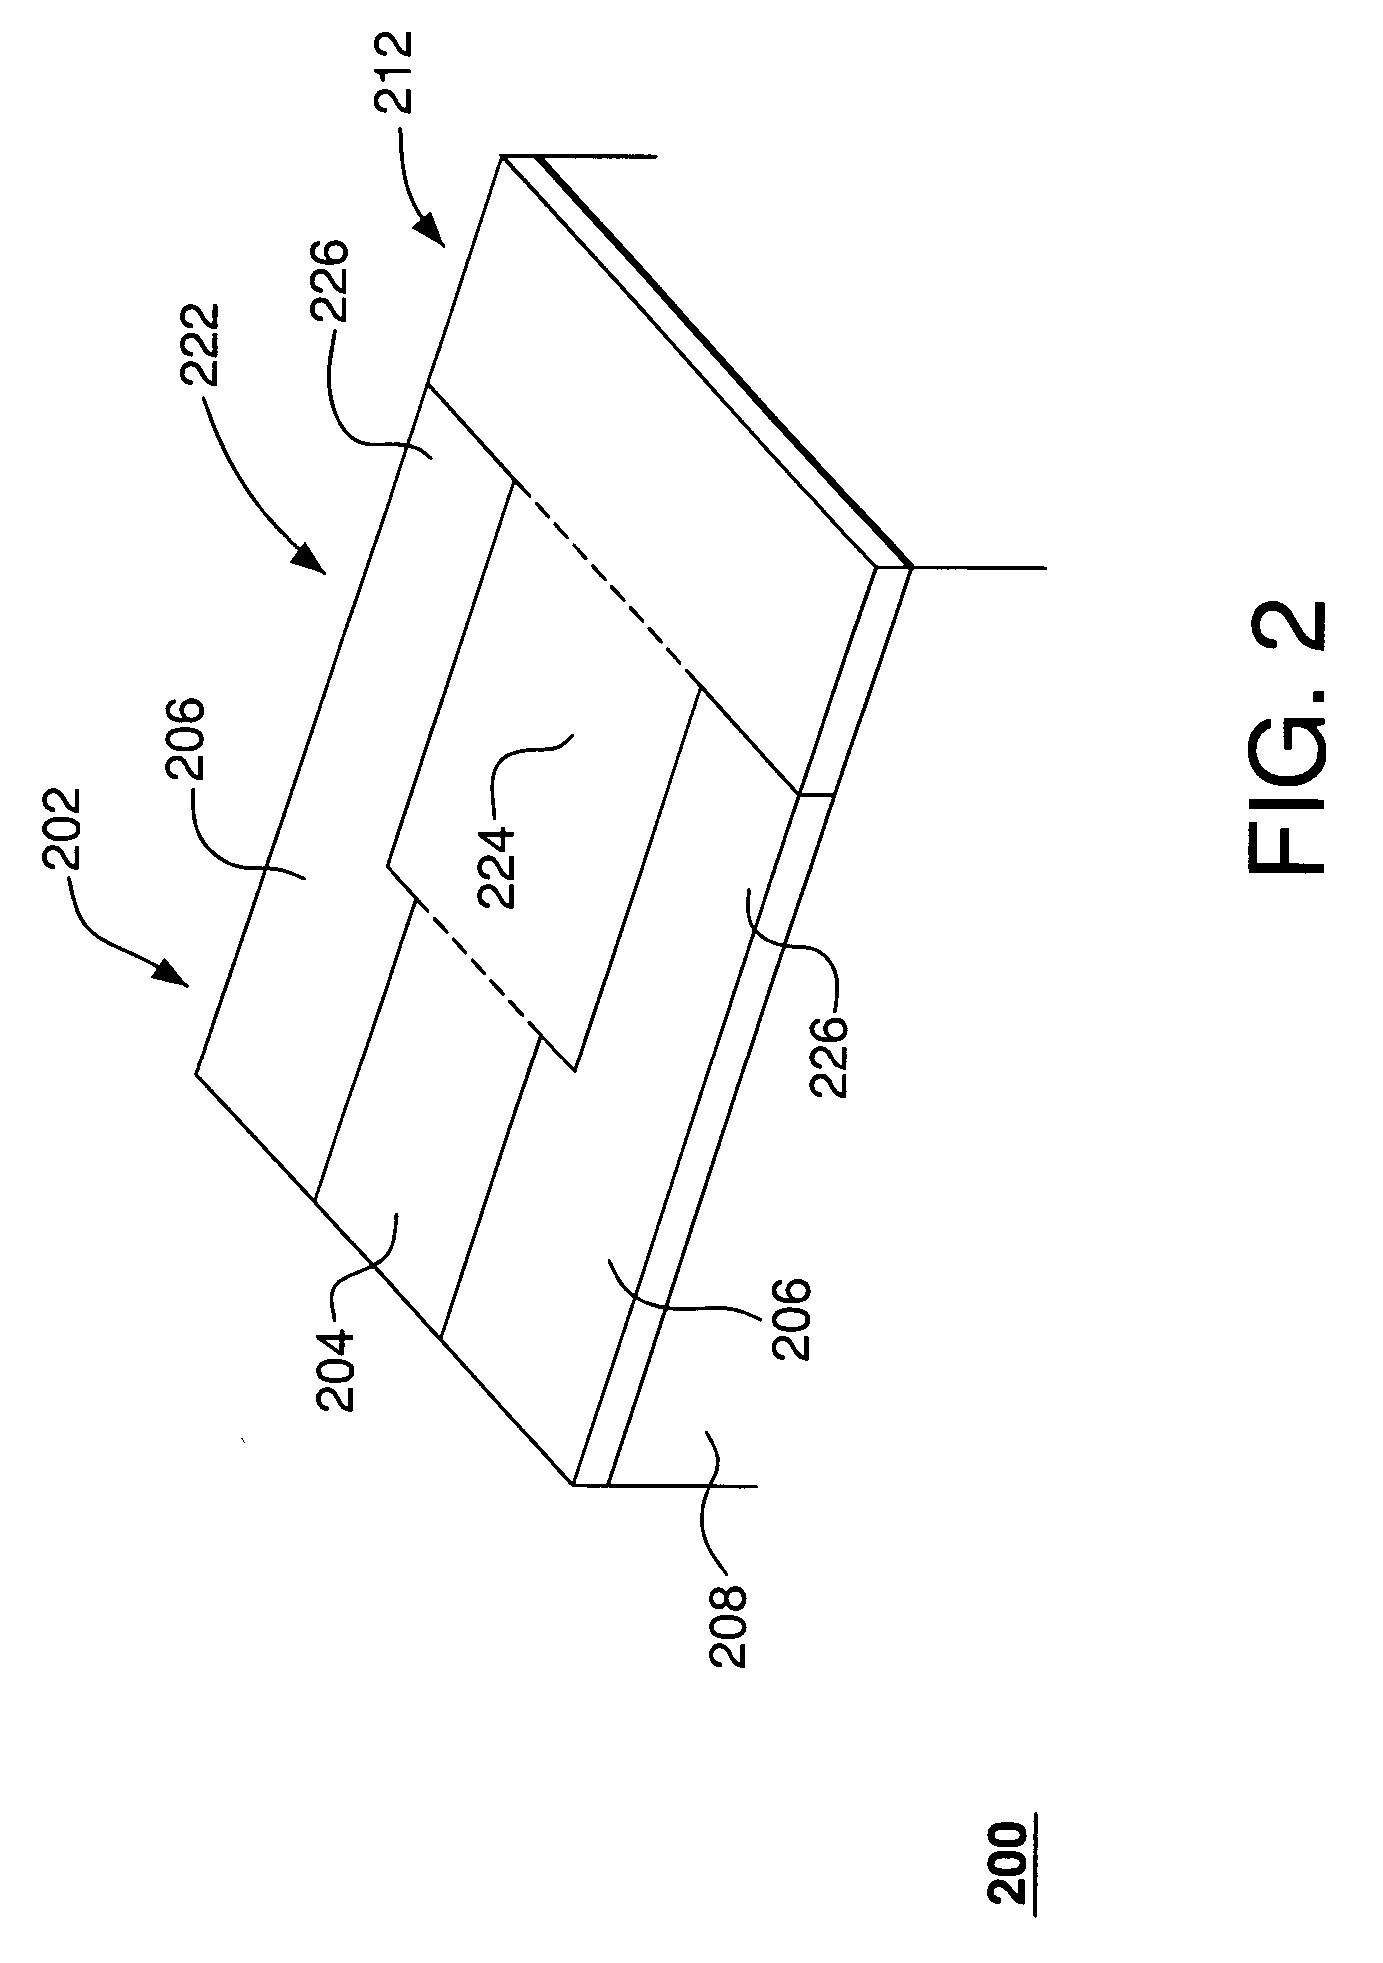 Optical device having a waveguide lens with multimode interference